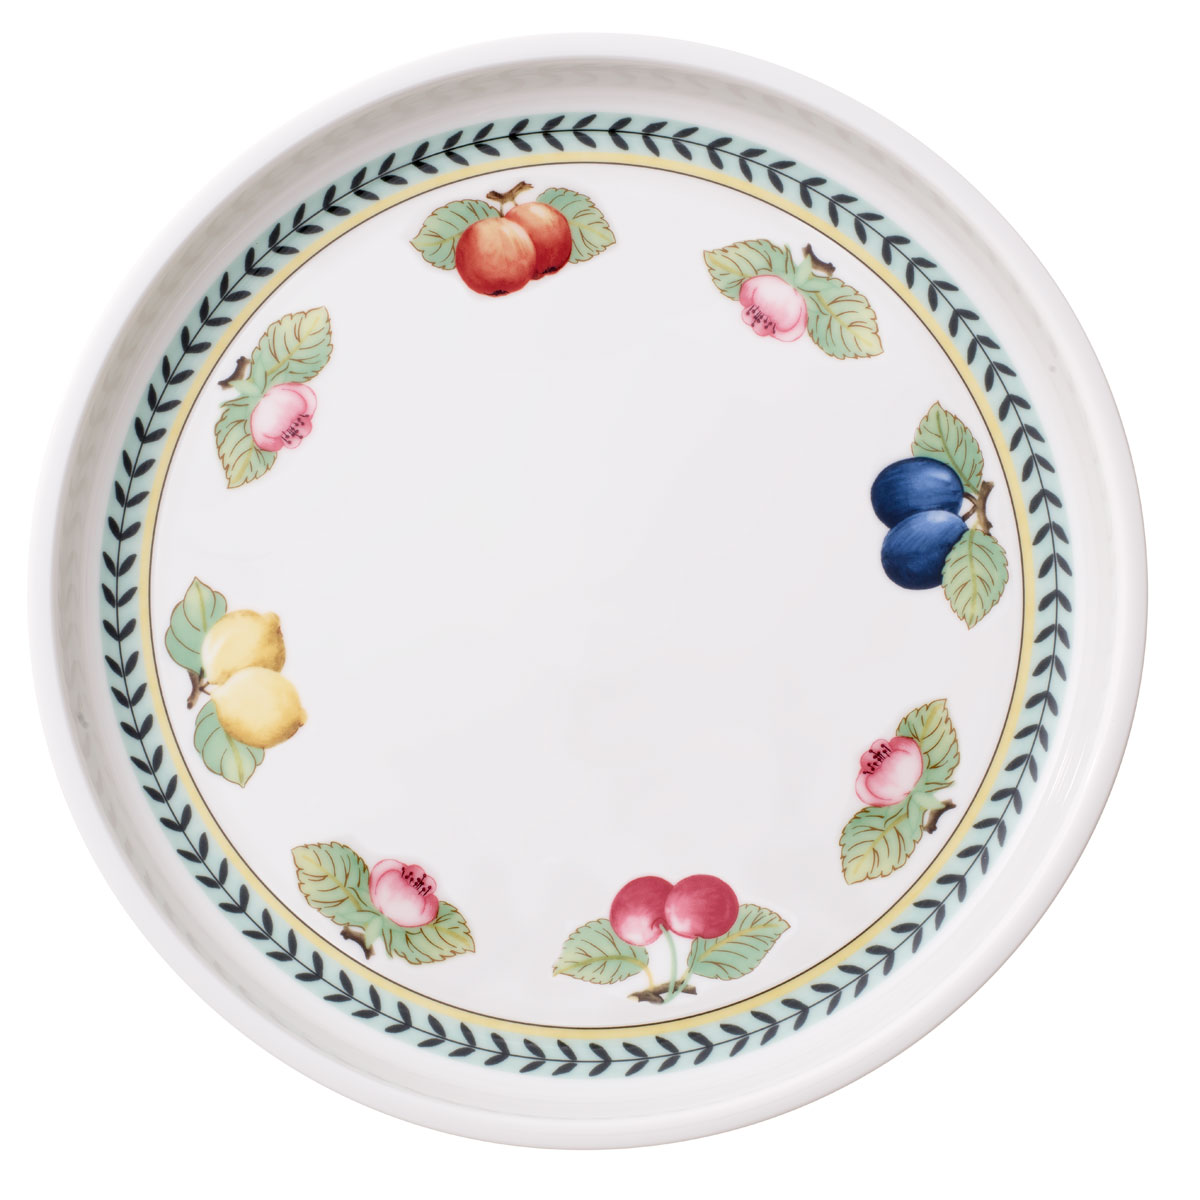 Villeroy and Boch French Garden Baking Round Serving Dish Lid Large